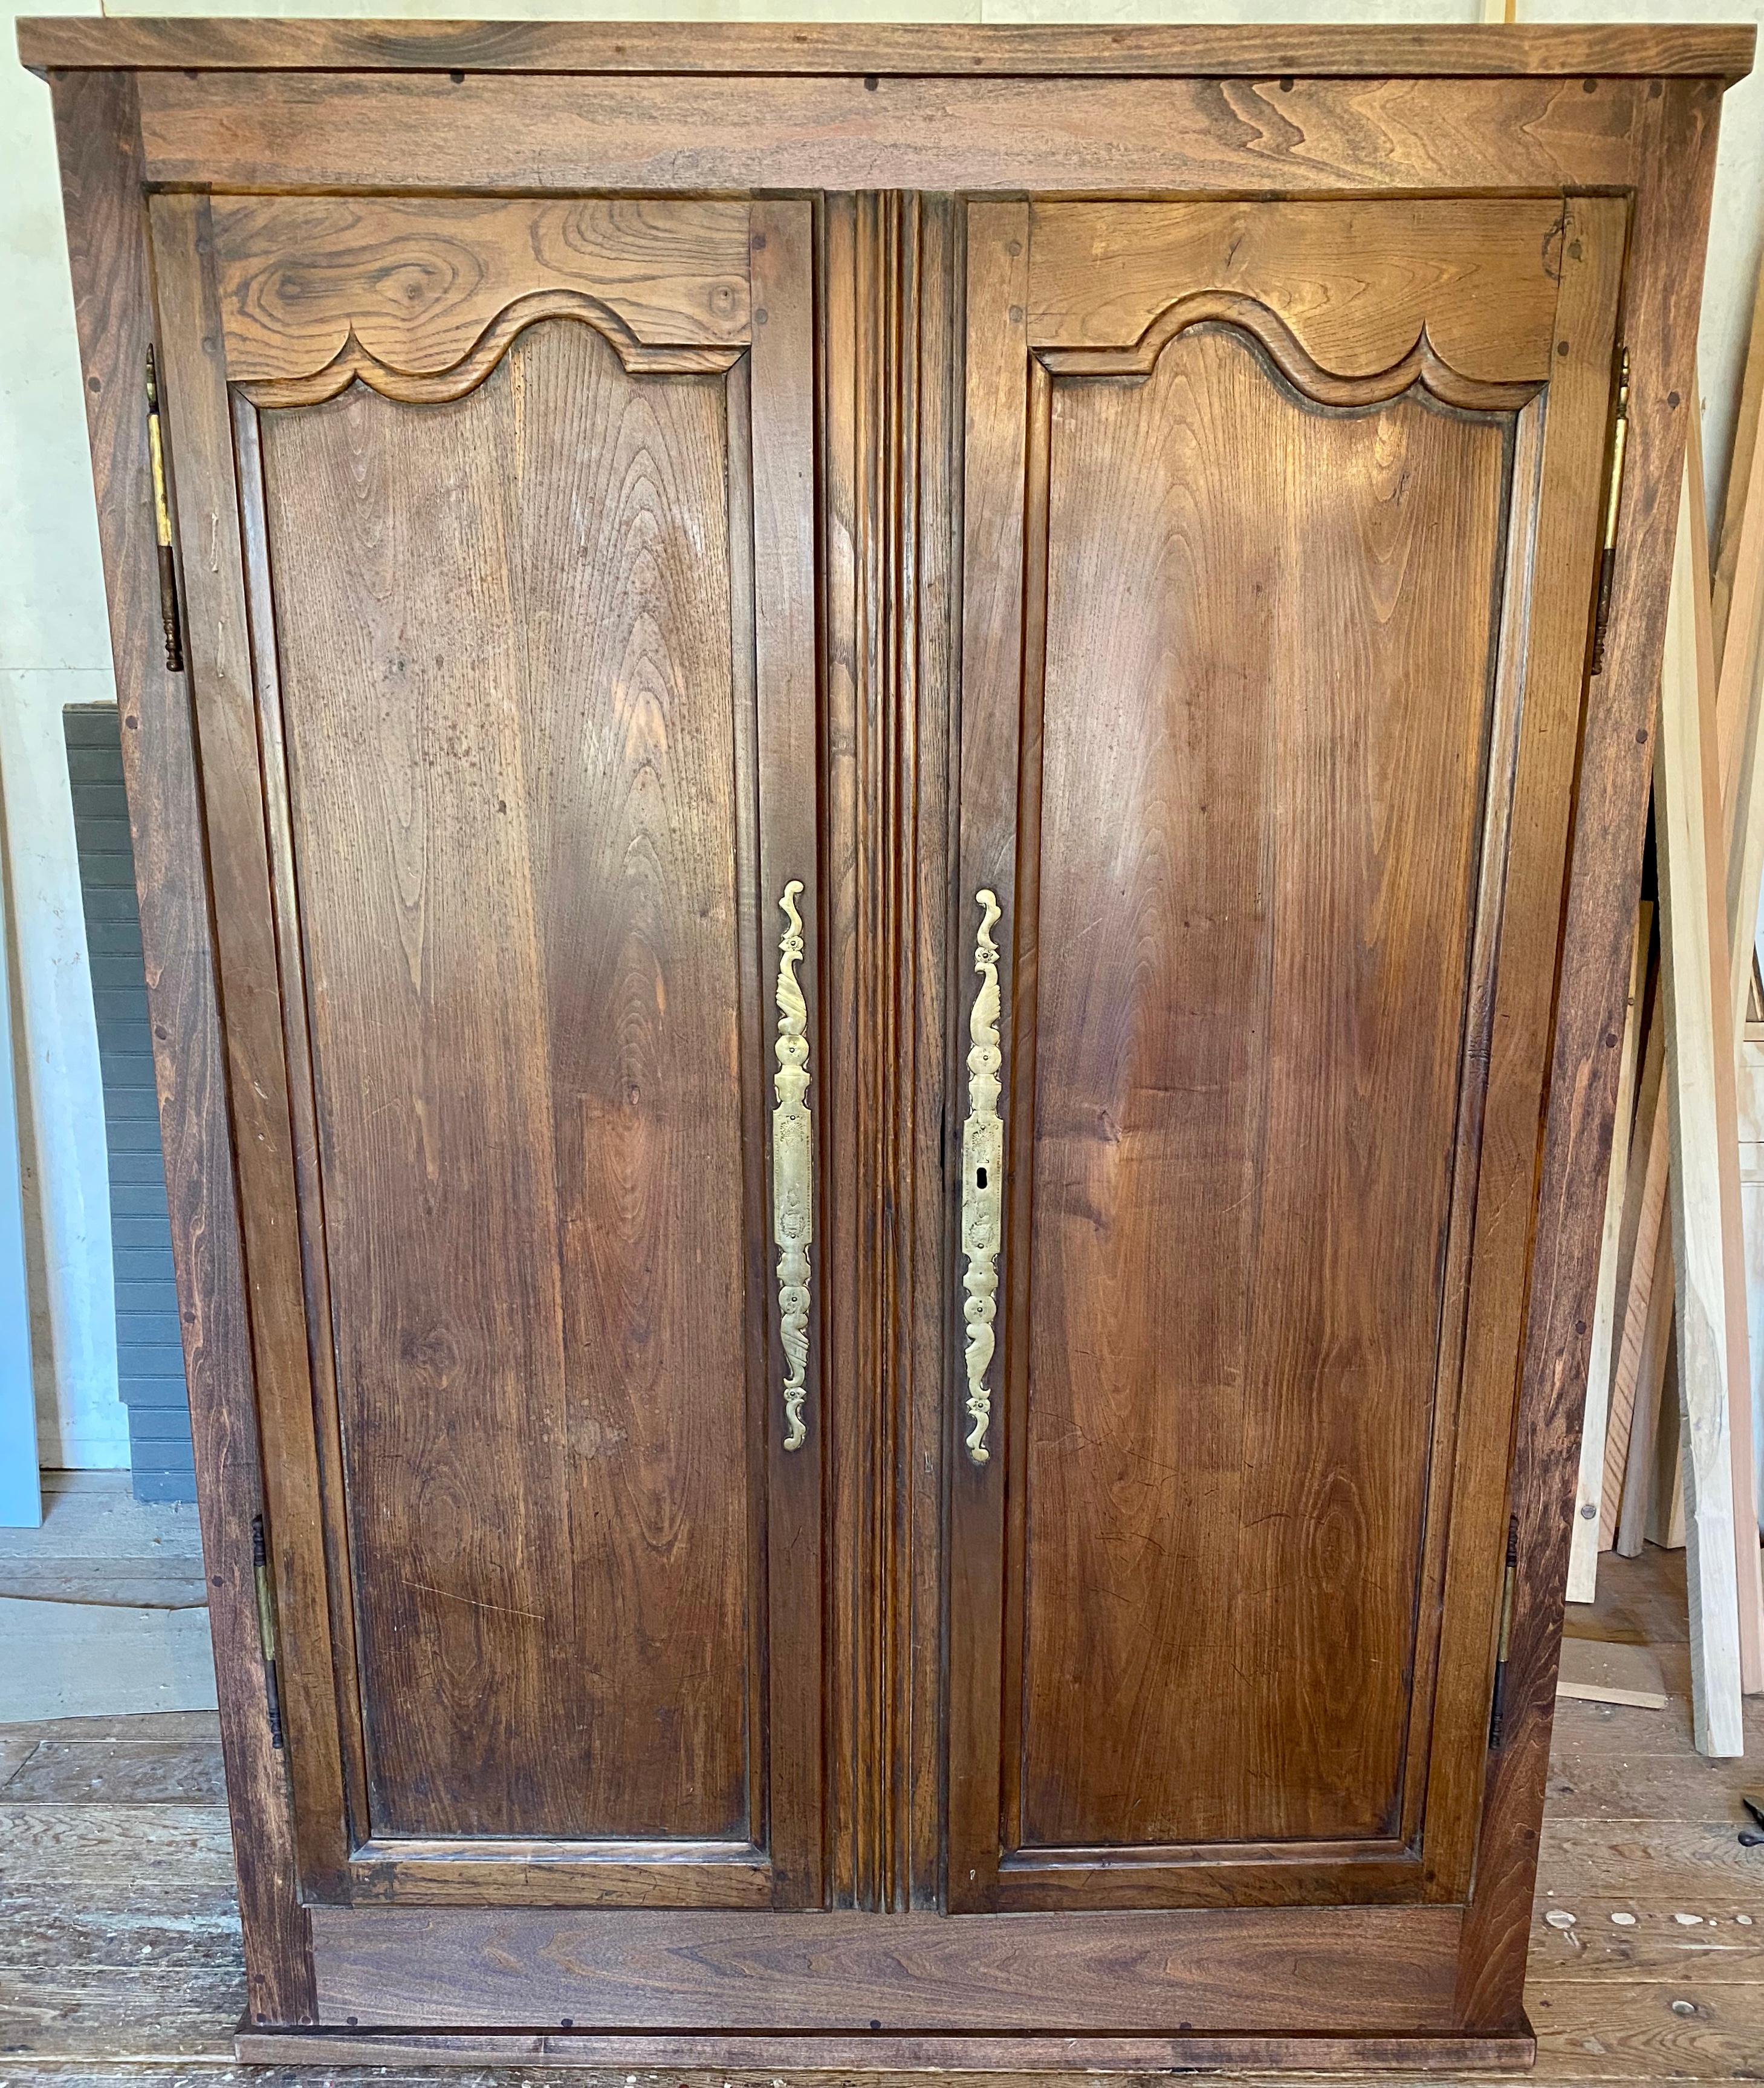 Very shallow depth two door armoire that will fit into a small room or space for extra storage or serve as entertainment cabinet for large screen TV, video and audio equipment. The cabinet is newly constructed incorporating a pair of antique French